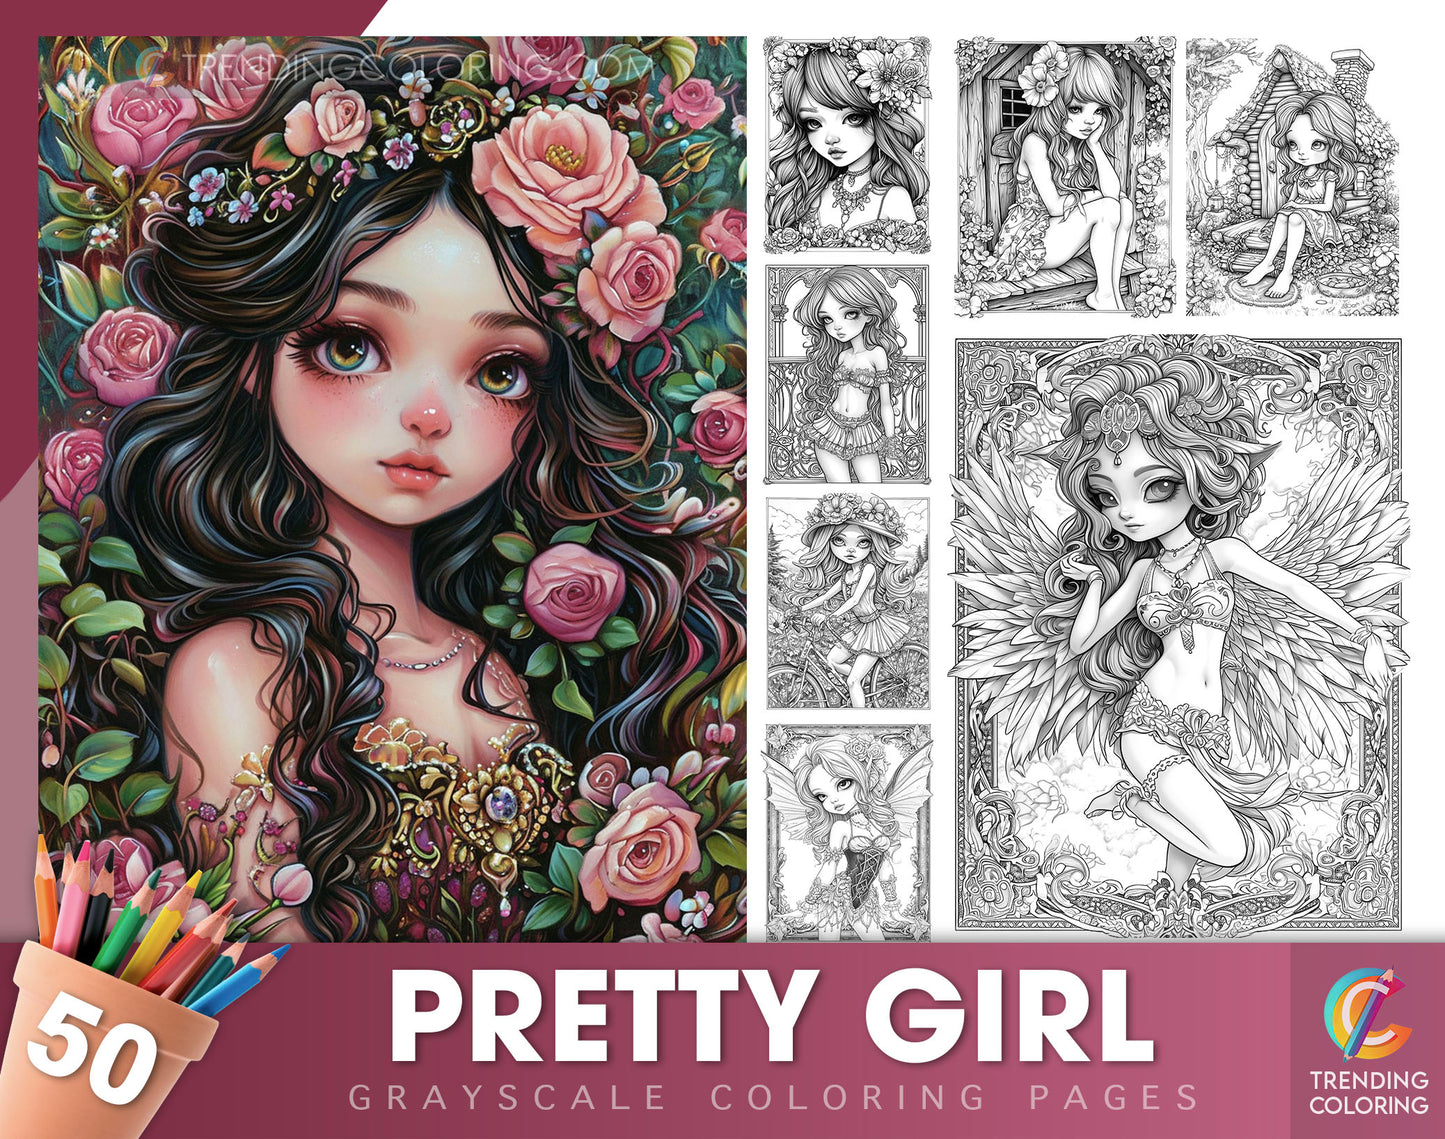 50 Pretty Girl Grayscale Coloring Pages - Instant Download - Printable Dark/Light